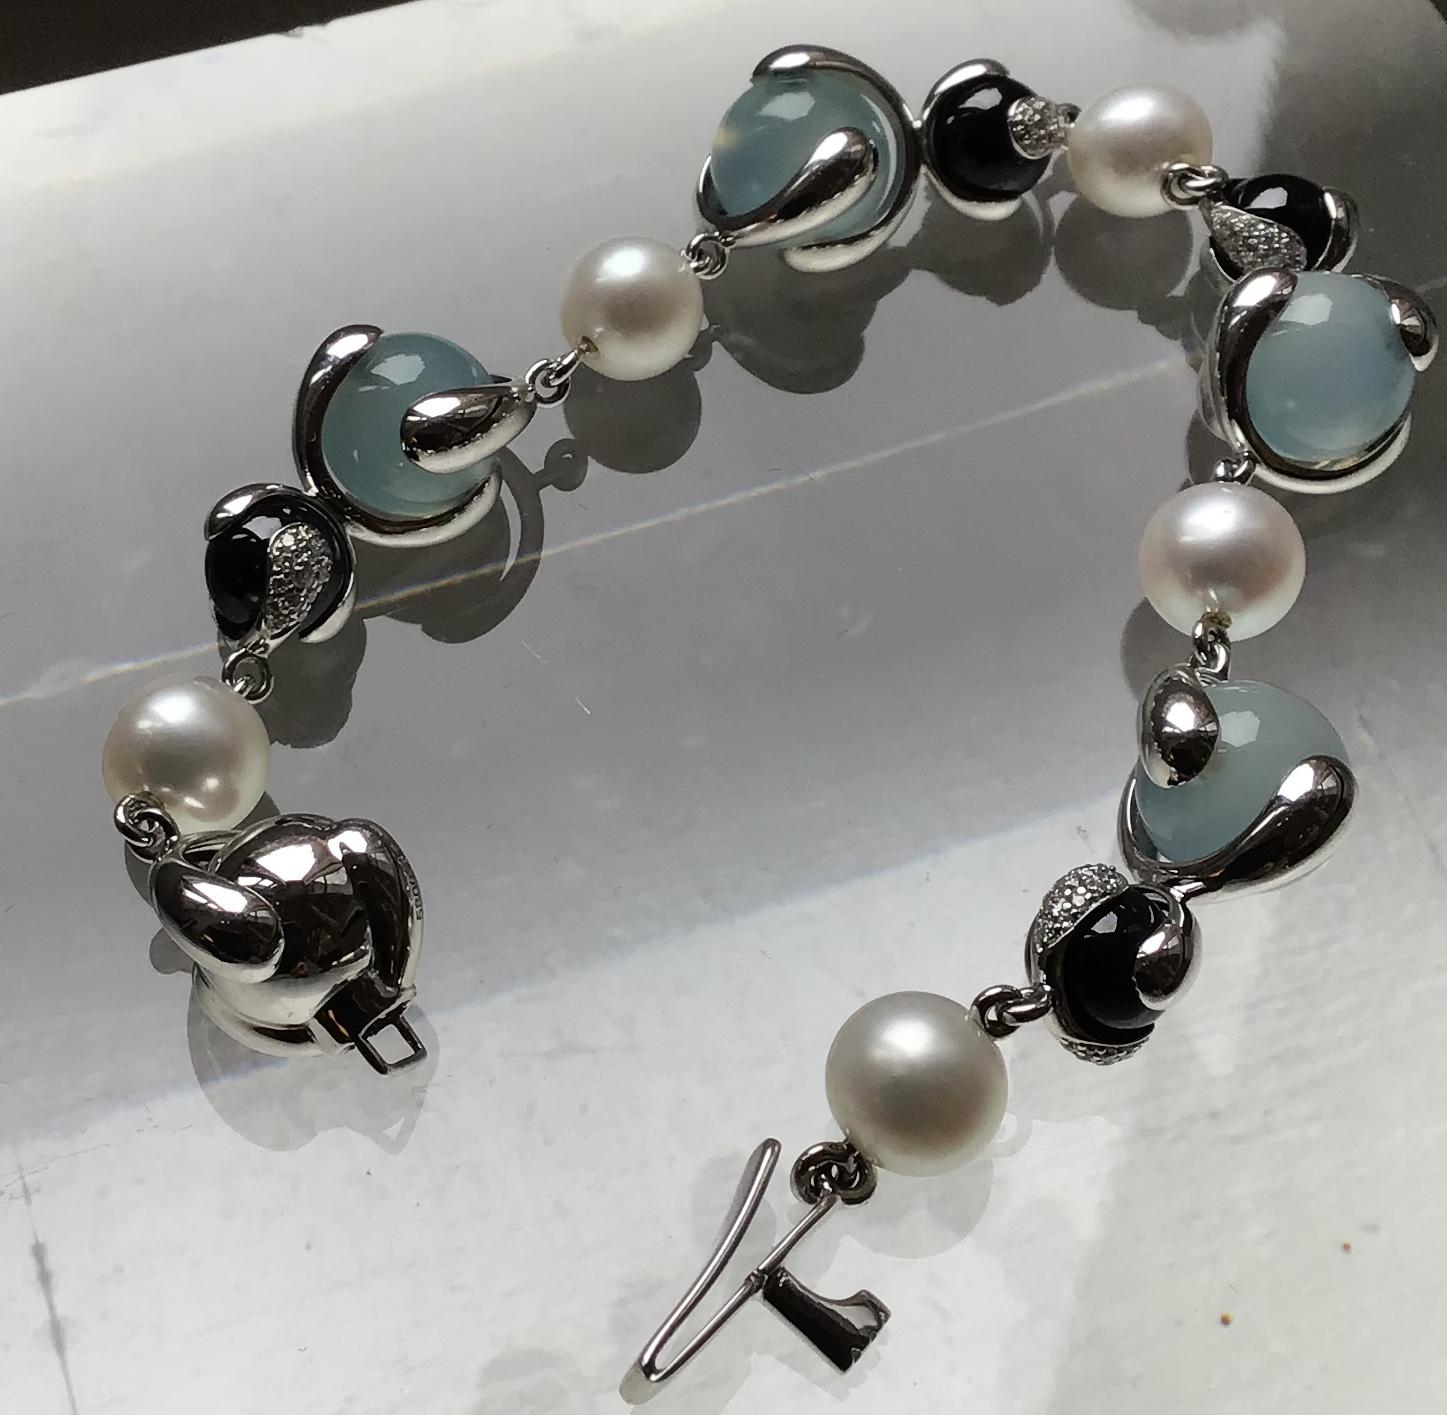 18-Karat Cardan Bracelet with 84.96ct Blue Chalcedony, 68.40ct Black Spinel, 54.54 ct Pearl Bead and 3.04ct Round Diamonds with box clasp closure.

Polished 18-karat white gold hardware and frame

Signed Marina B, Made in Italy and numbered 380063